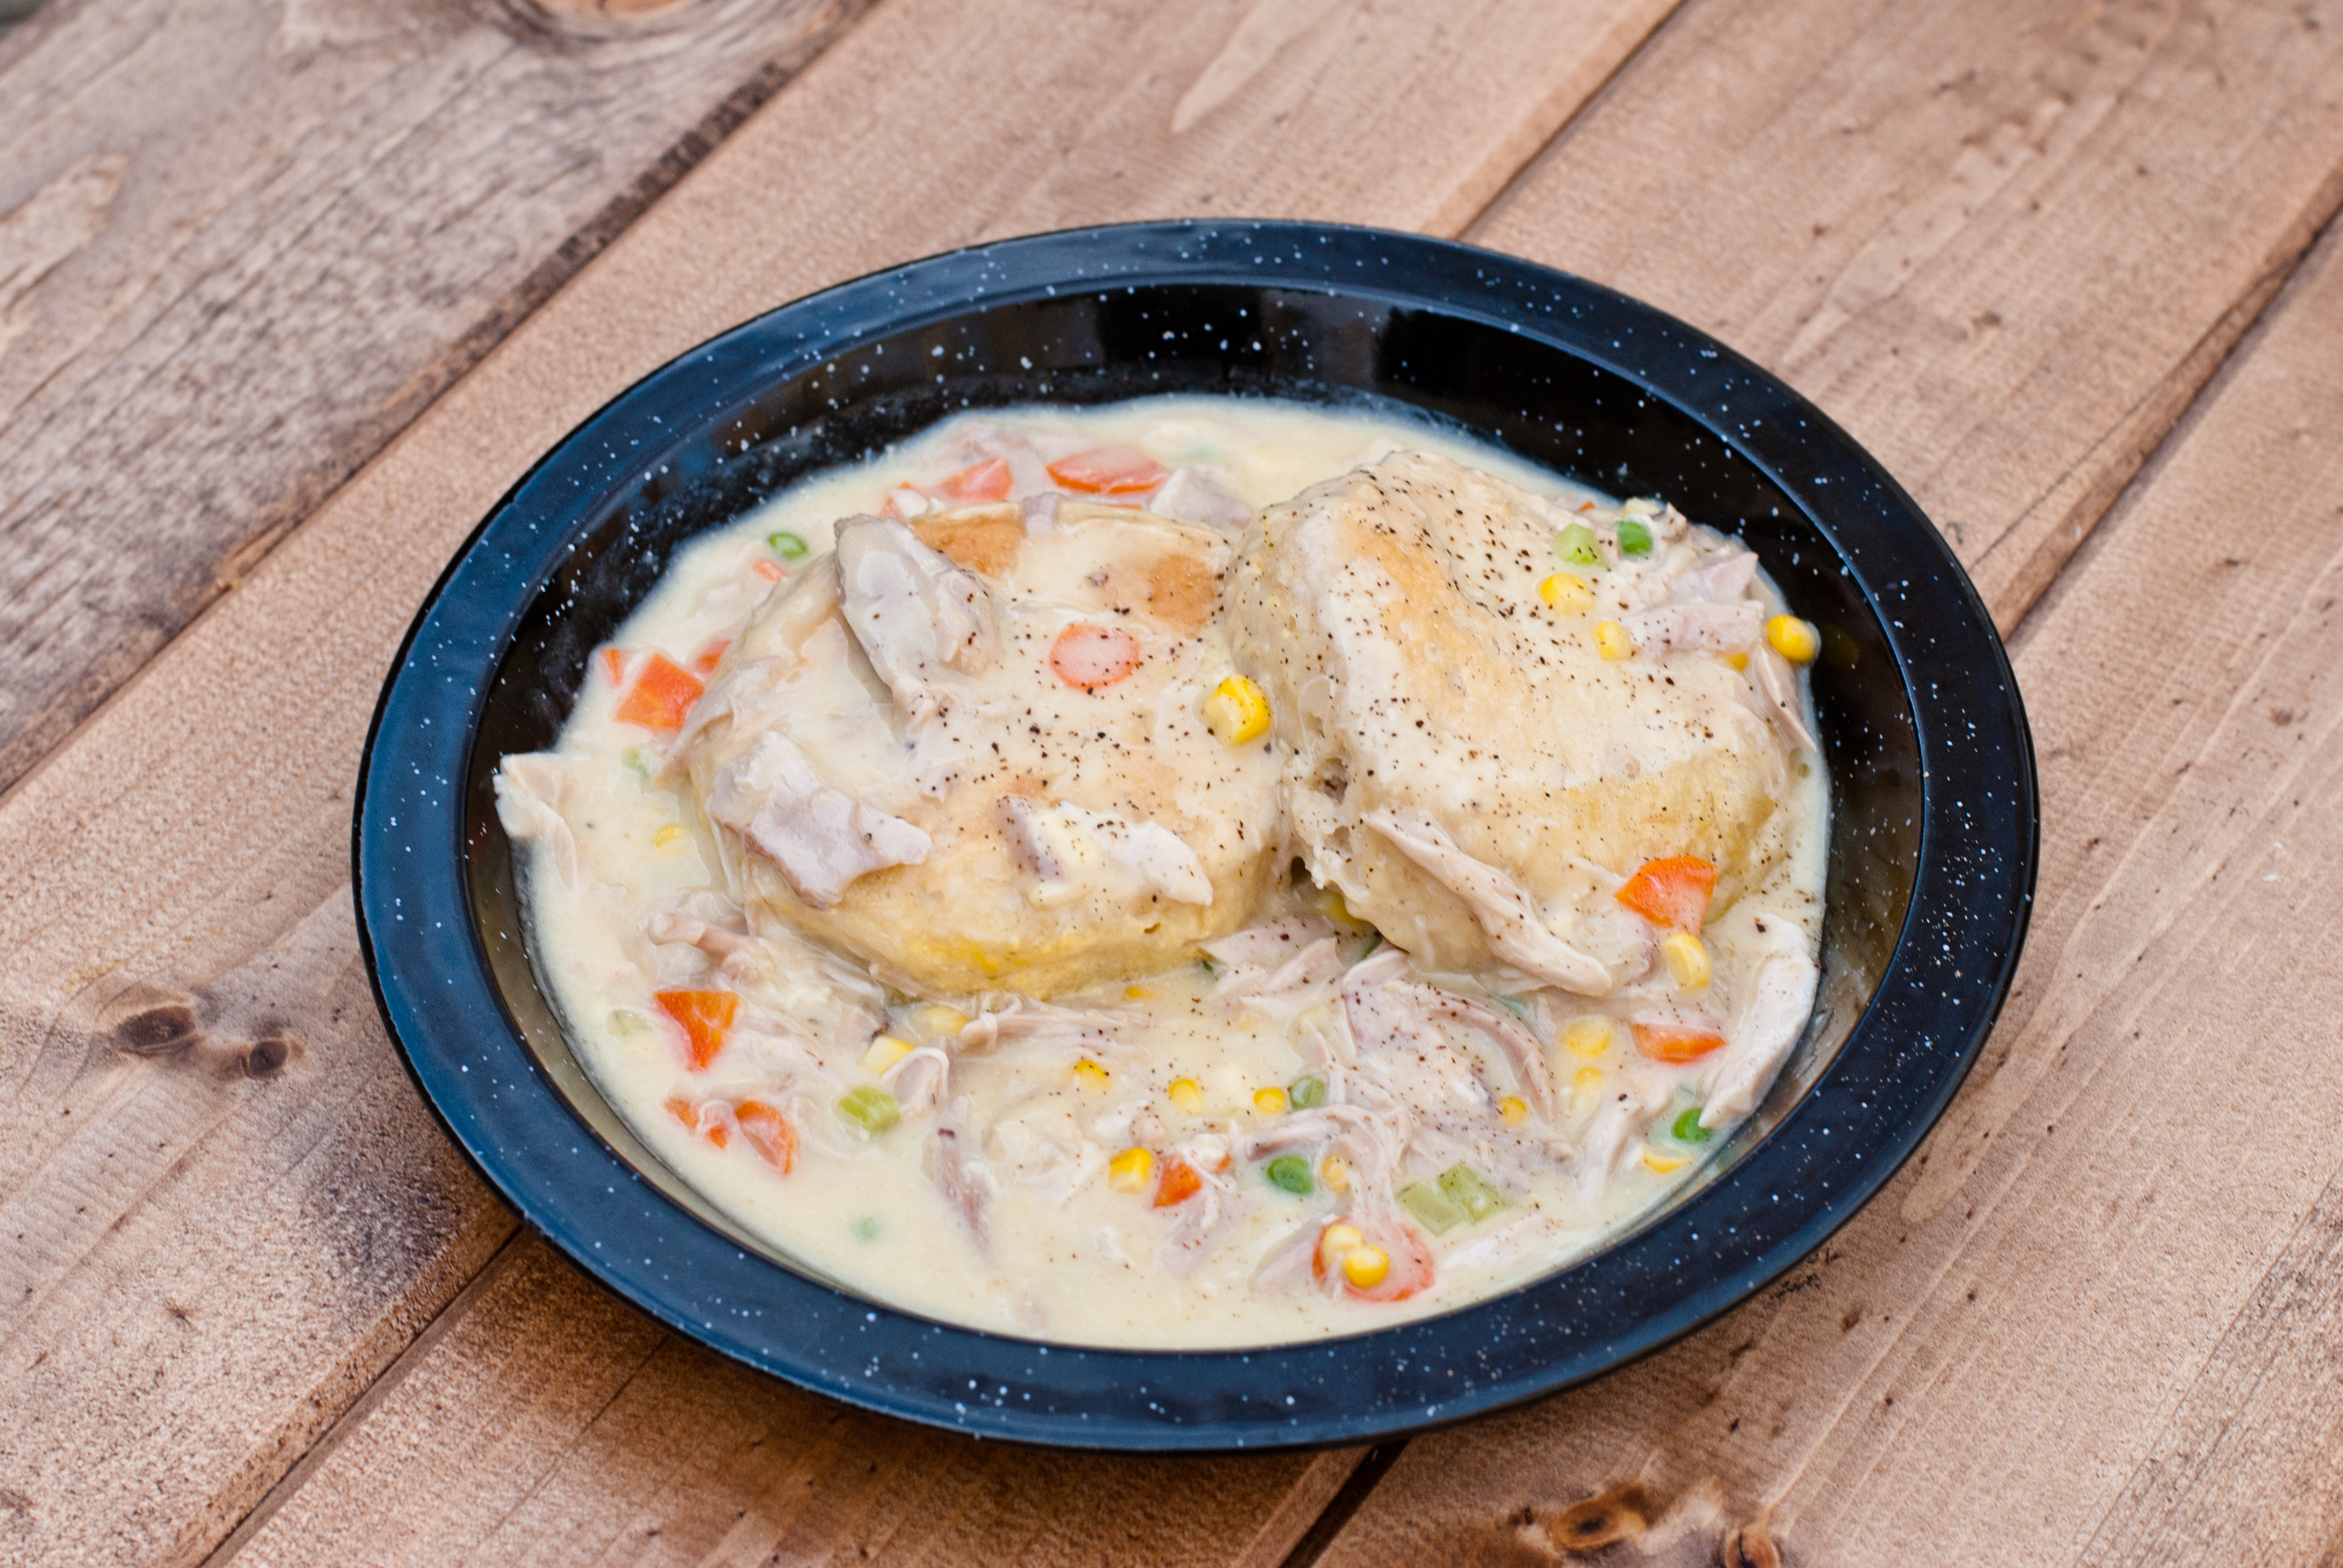 Chicken and Dumplings - Slow Braised Chicken Updates This Classic